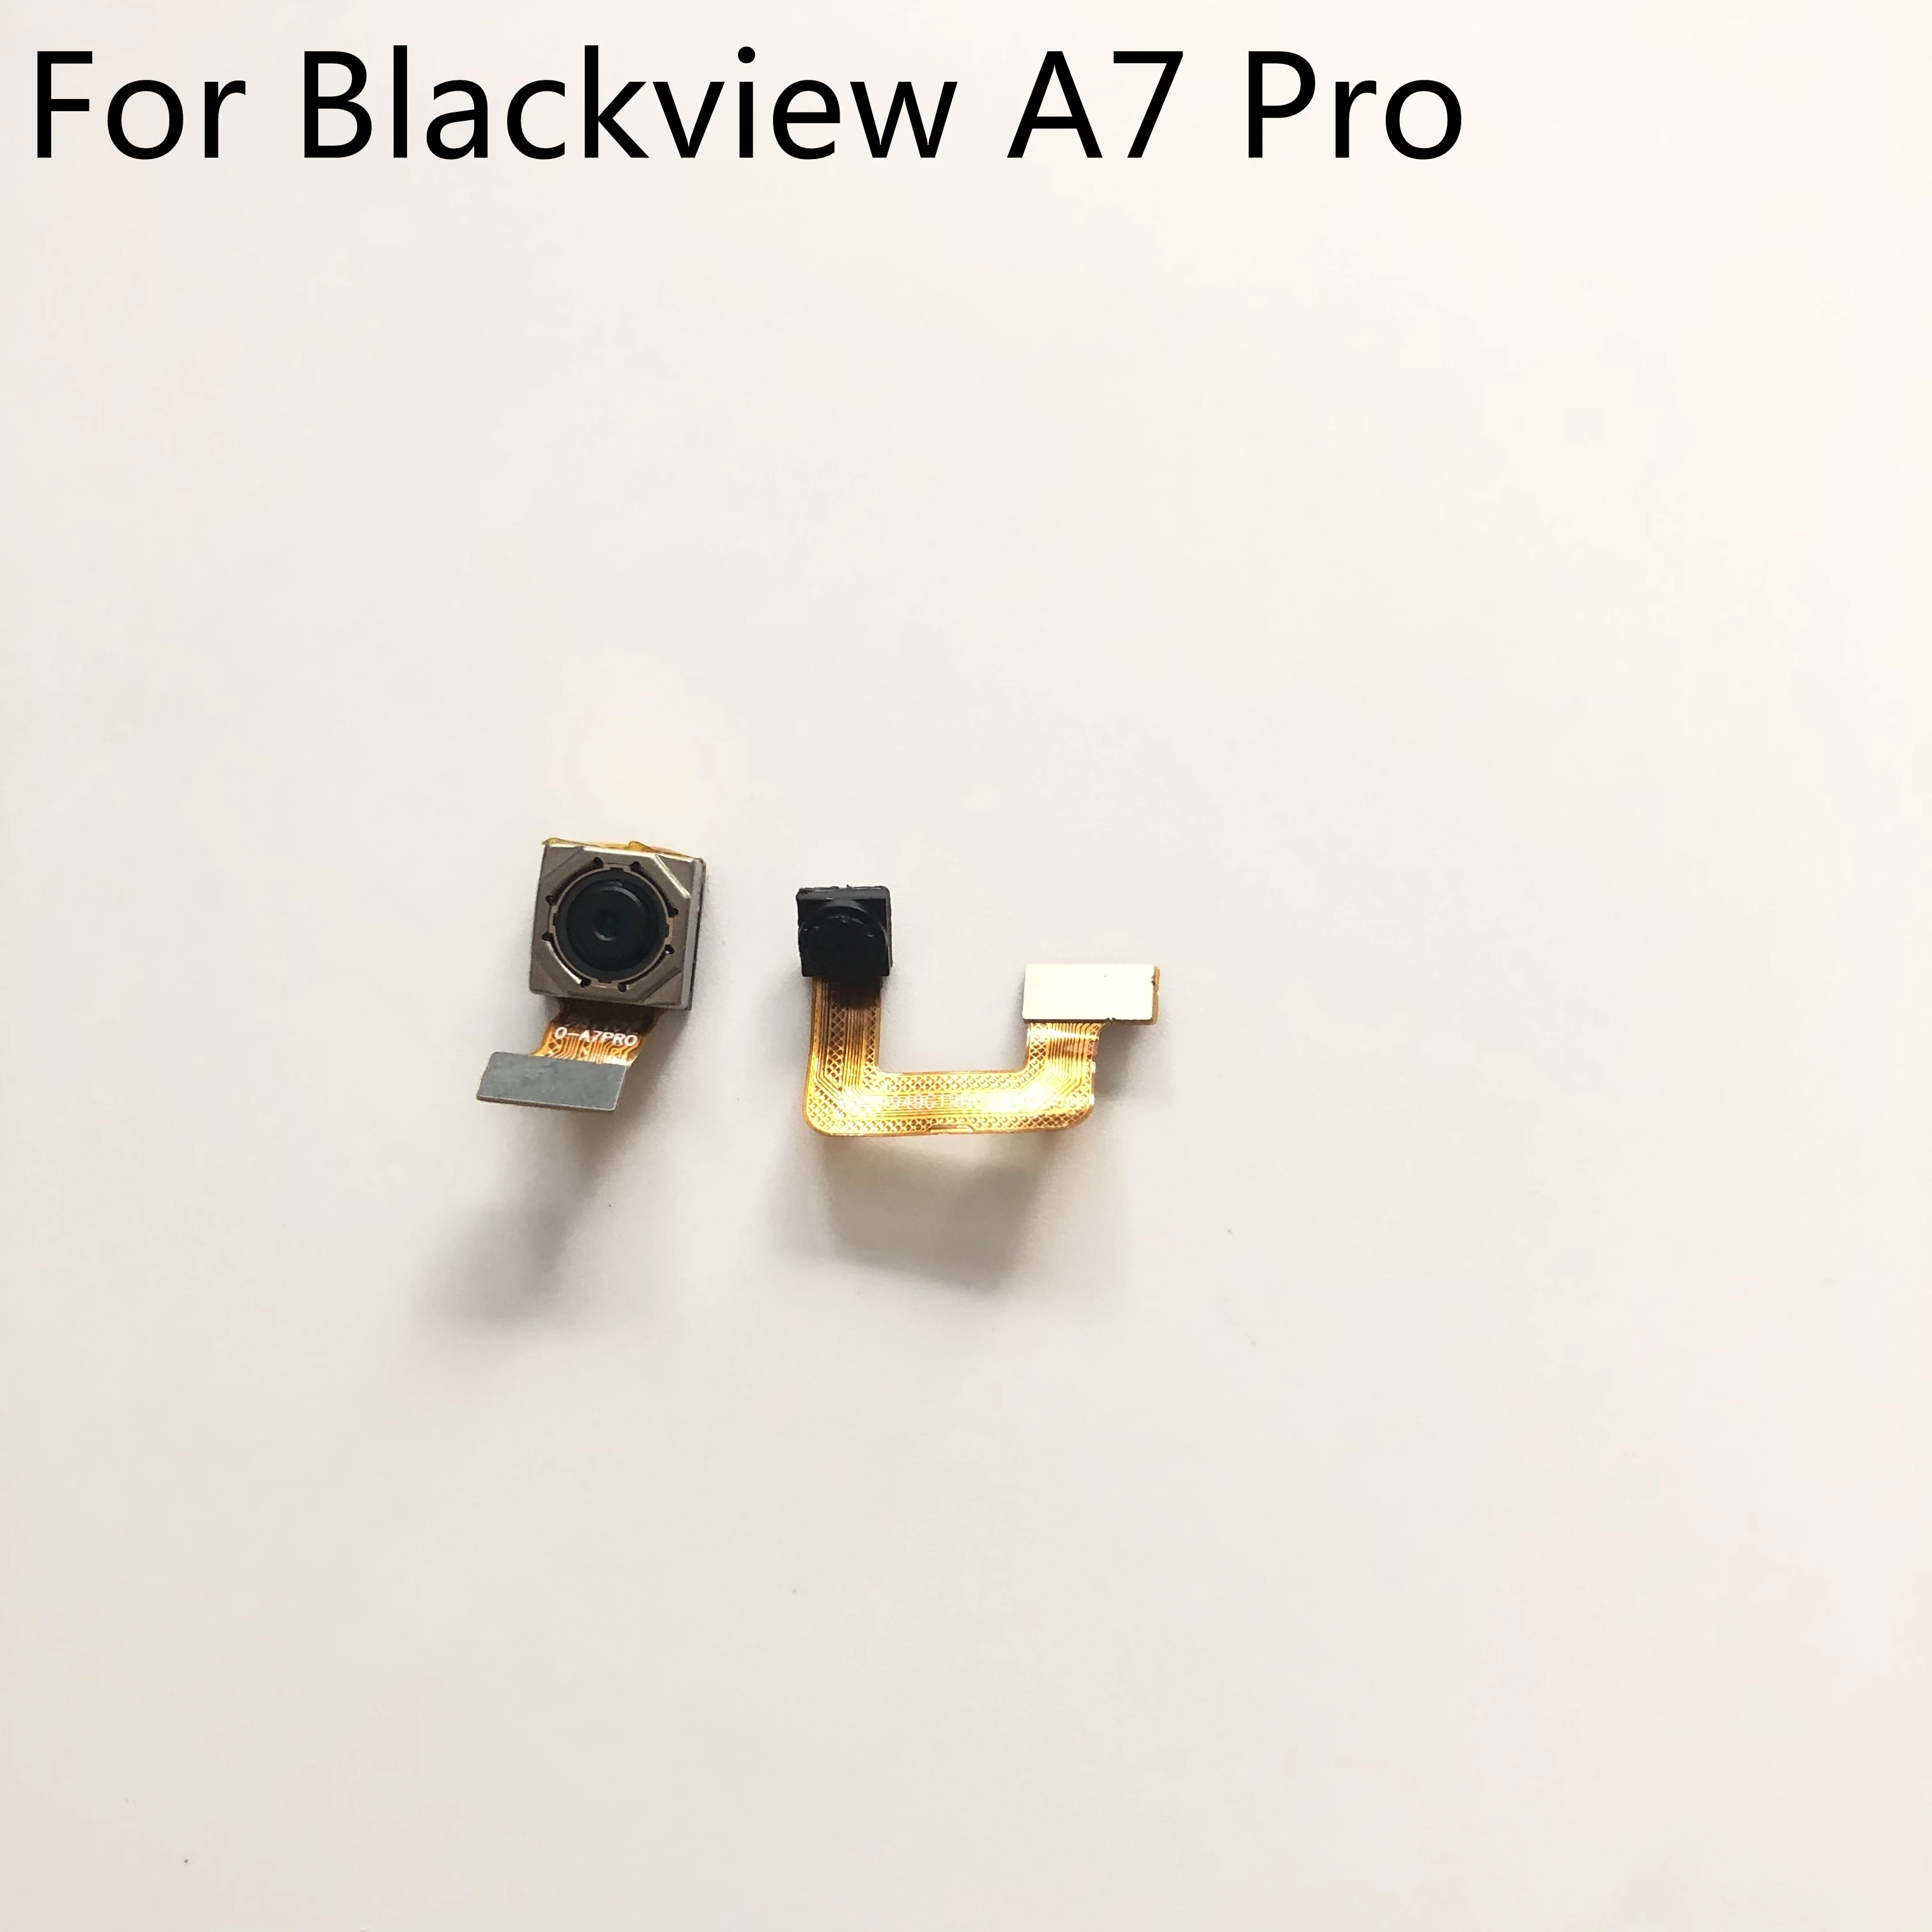 

High Quality Back Camera Rear Camera 8.0+3.0MP Module For Blackview A7 Pro MTK6737 5.0" 1280x720 Free Shipping + Tracking Number